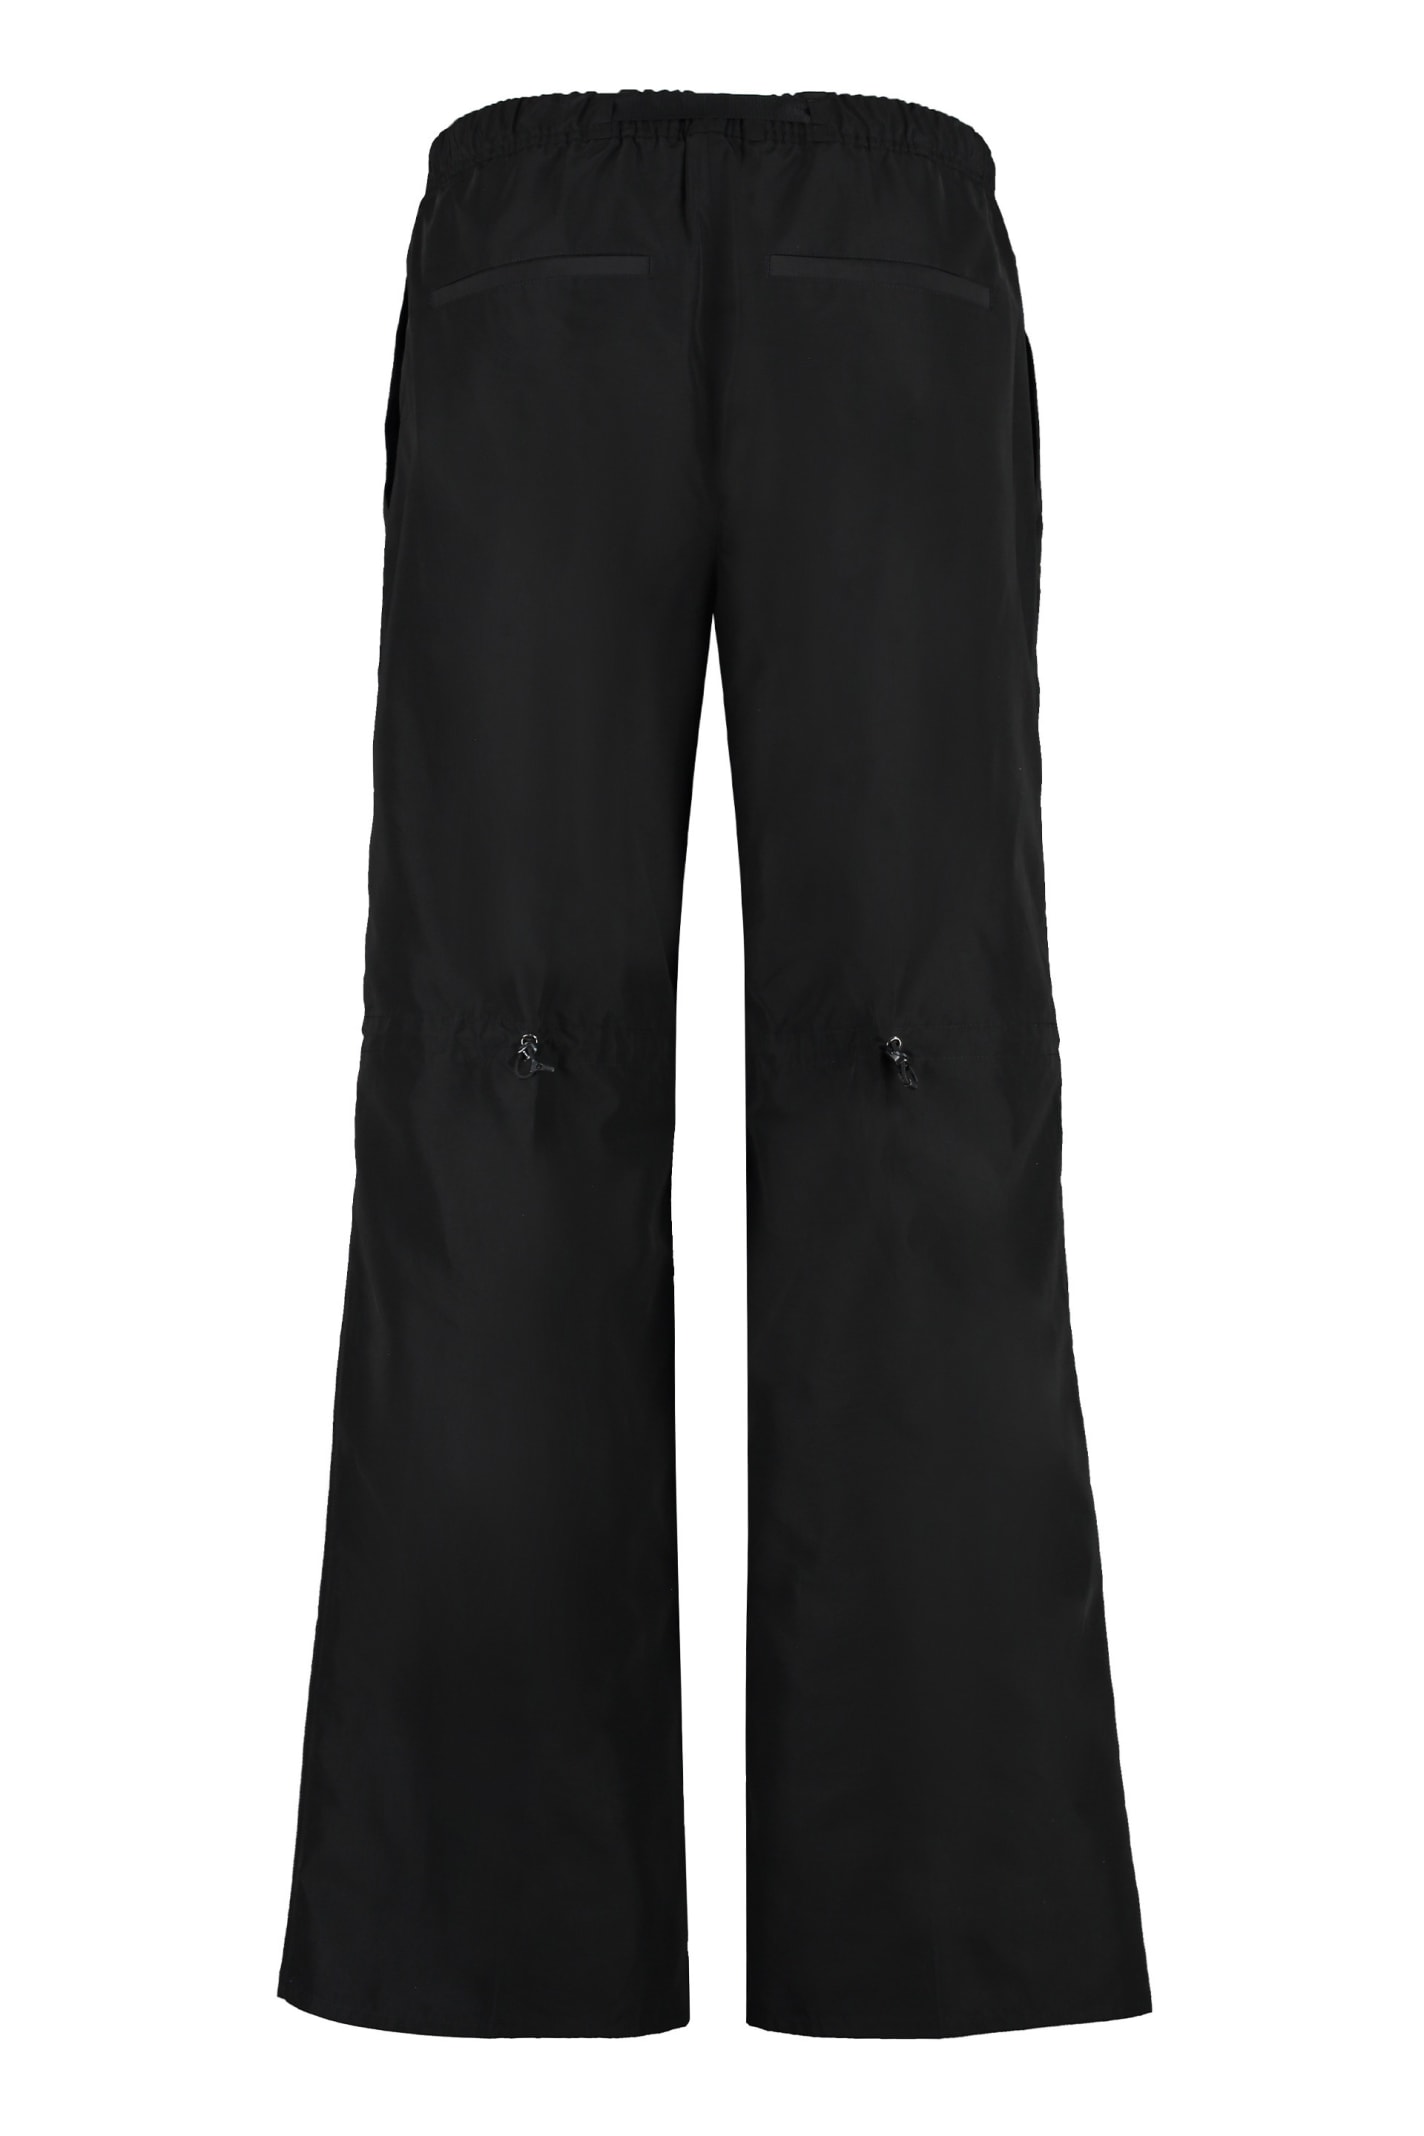 OUR LEGACY WANDER TROUSER Black-